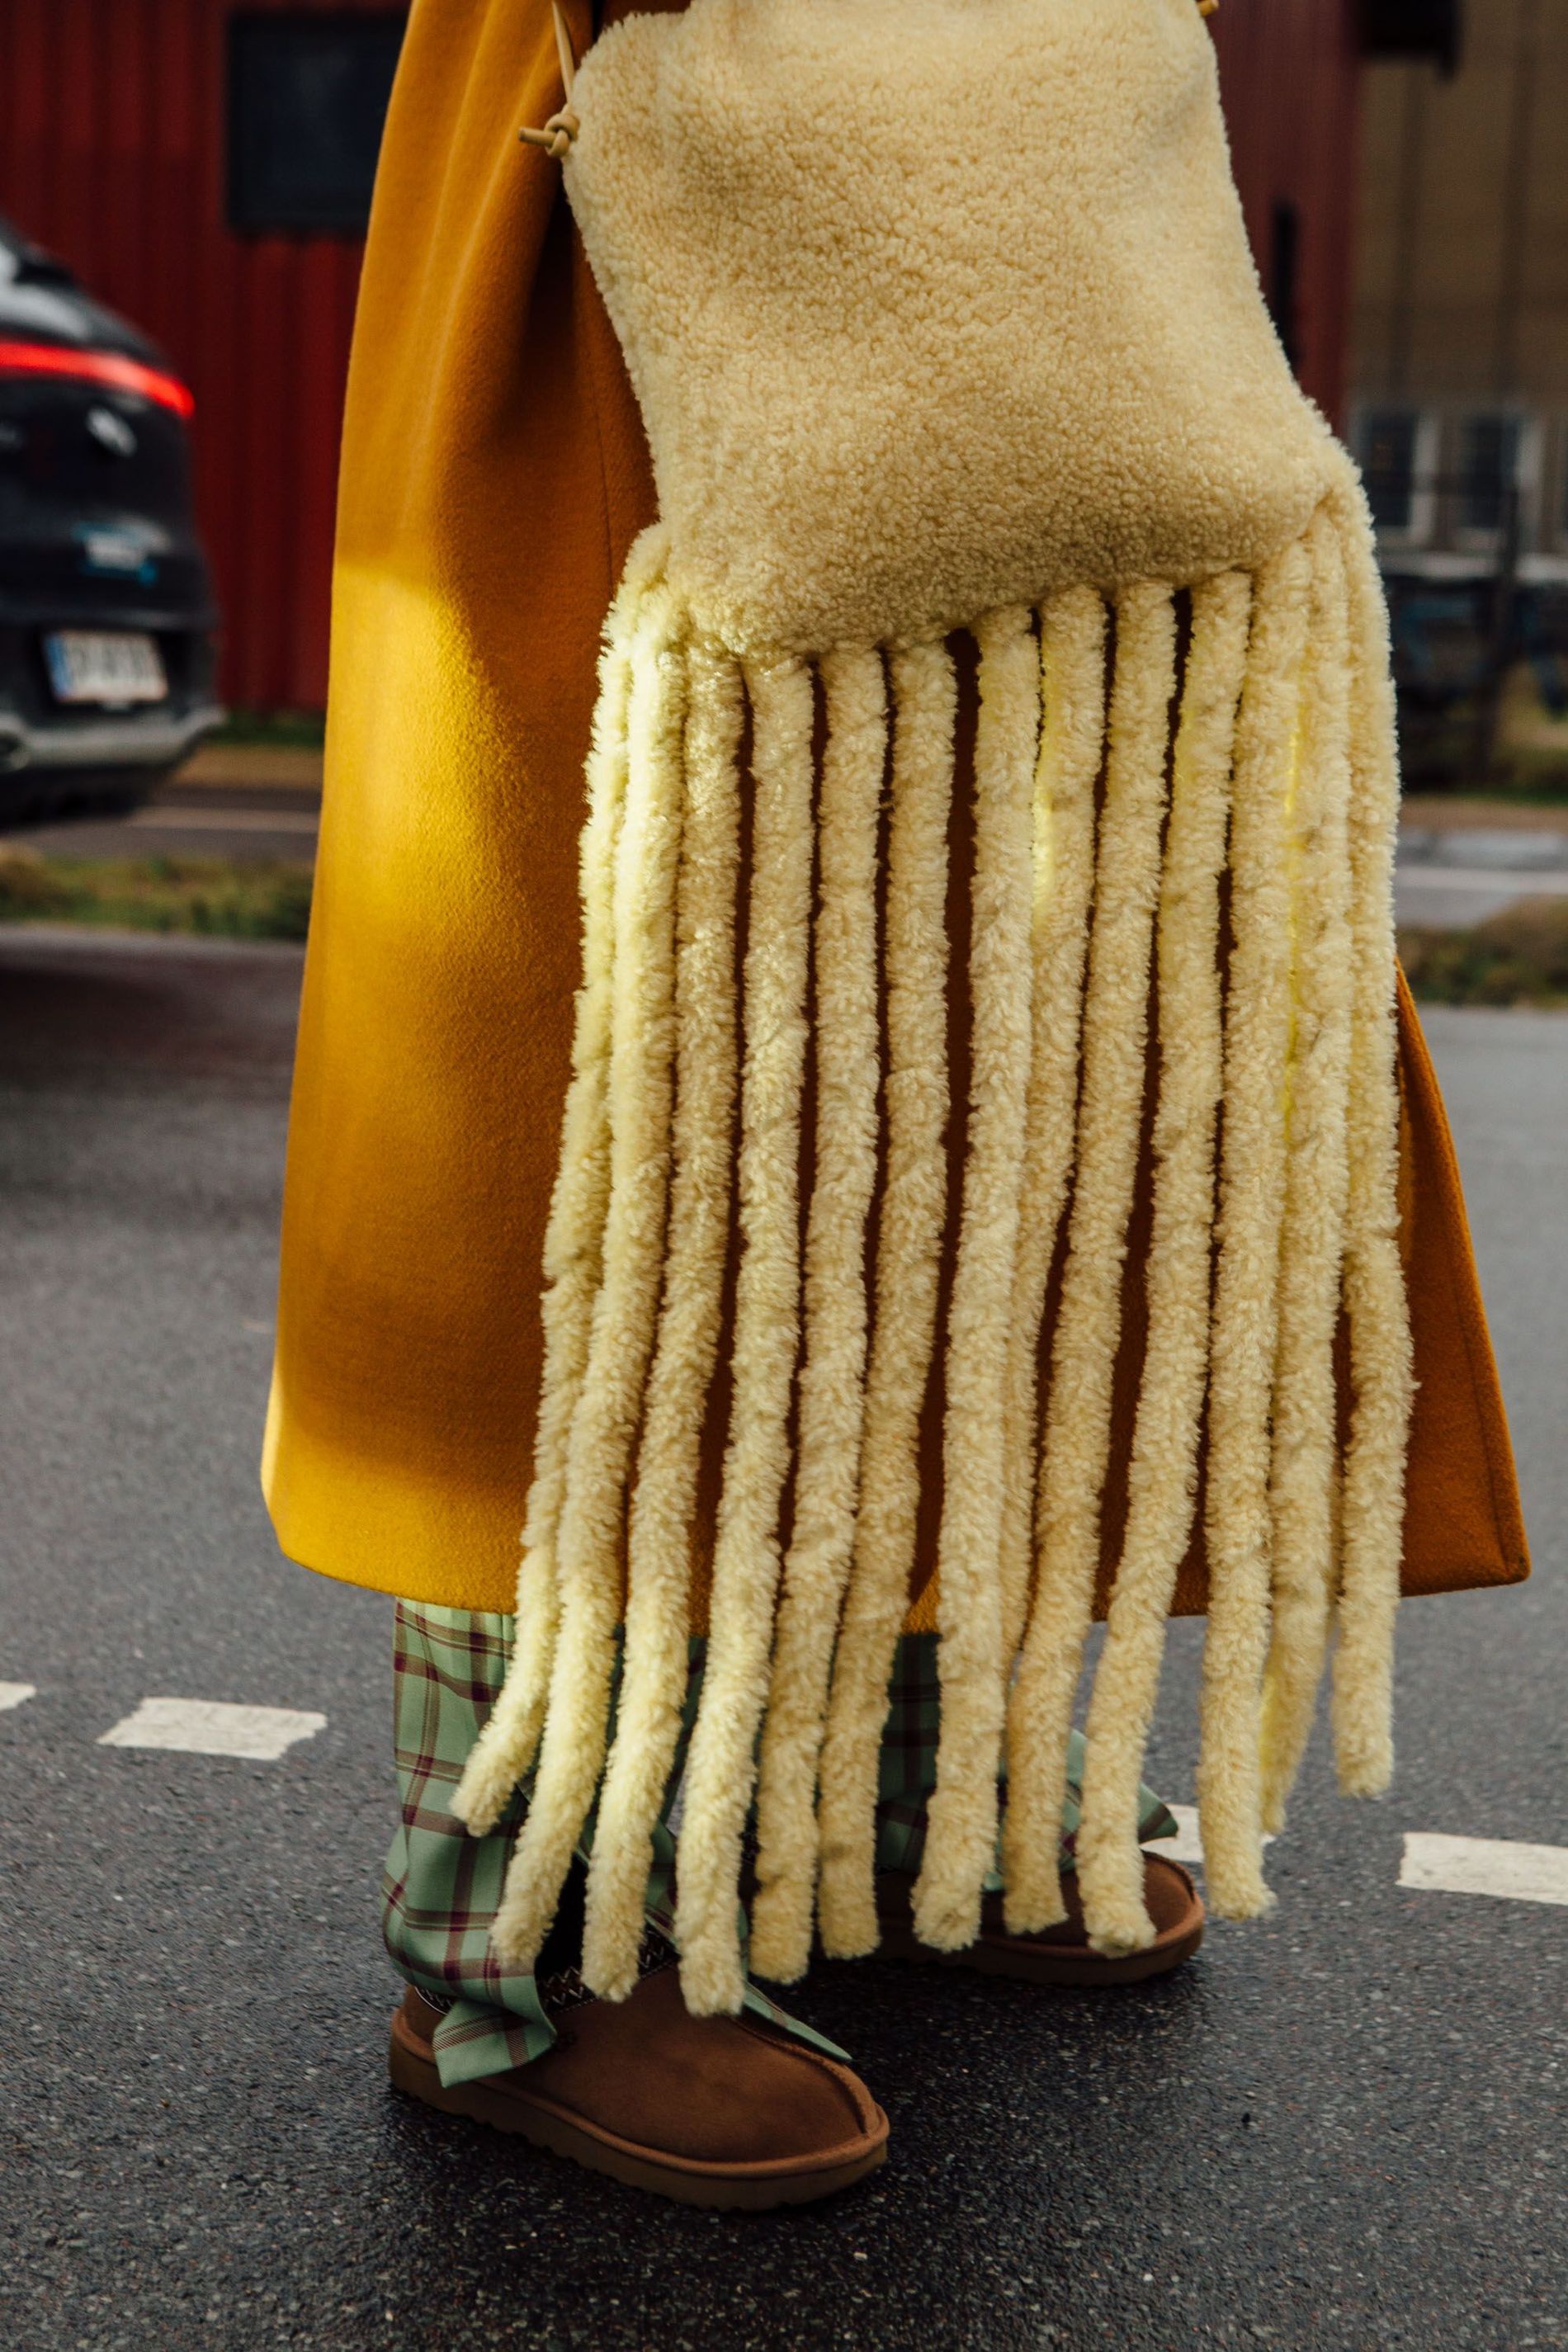 Guest wears a butter yellow faux fur bag with fringe